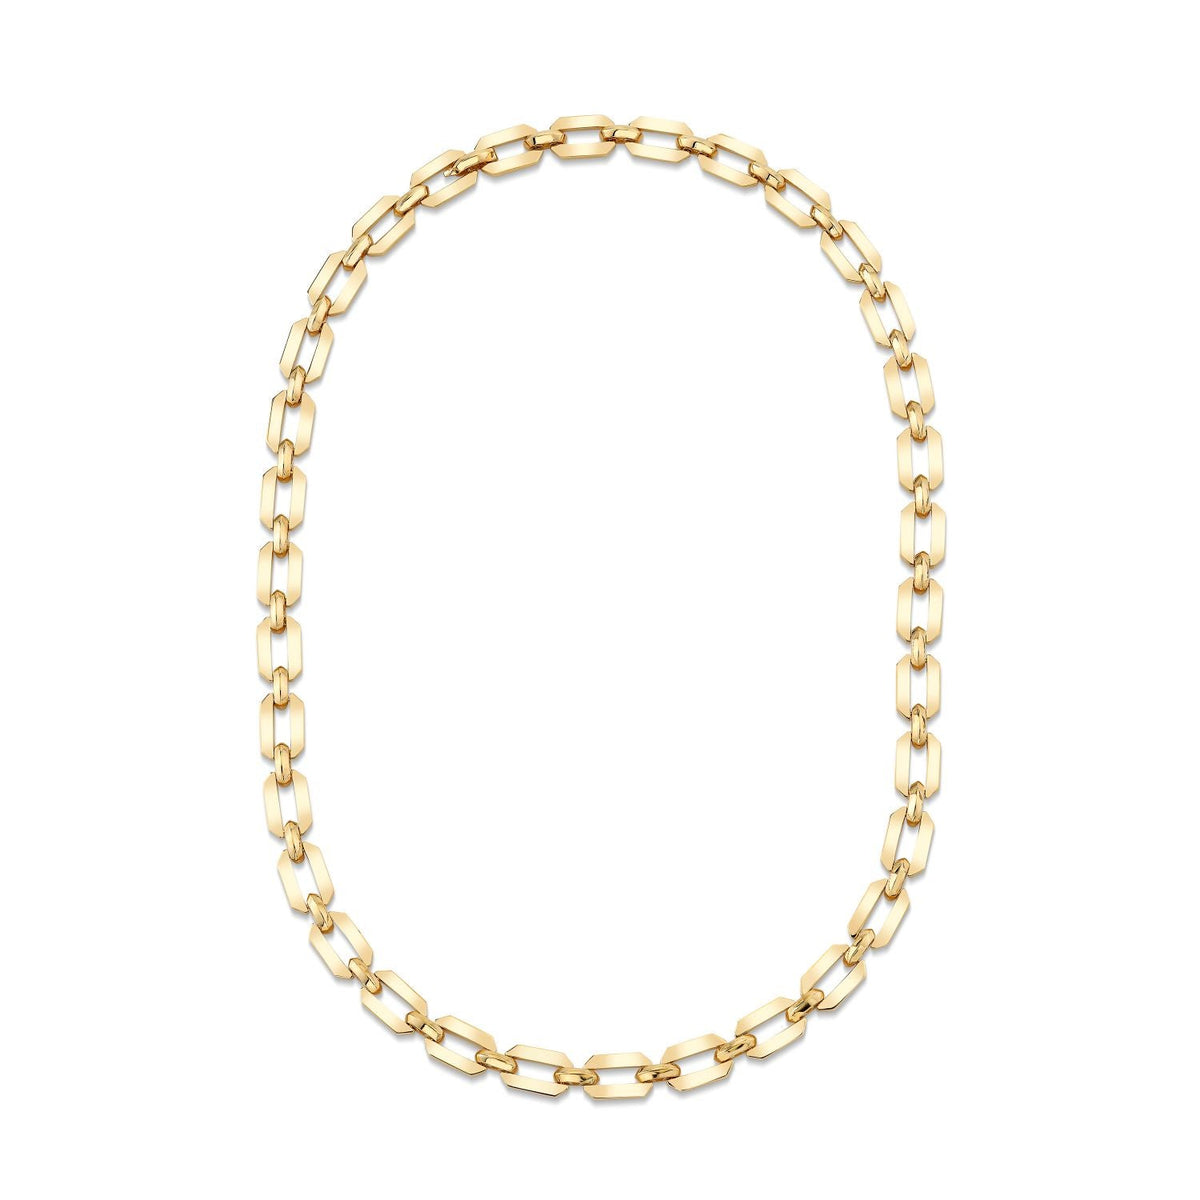 SOLID GOLD FLAT GEO LINK NECKLACE